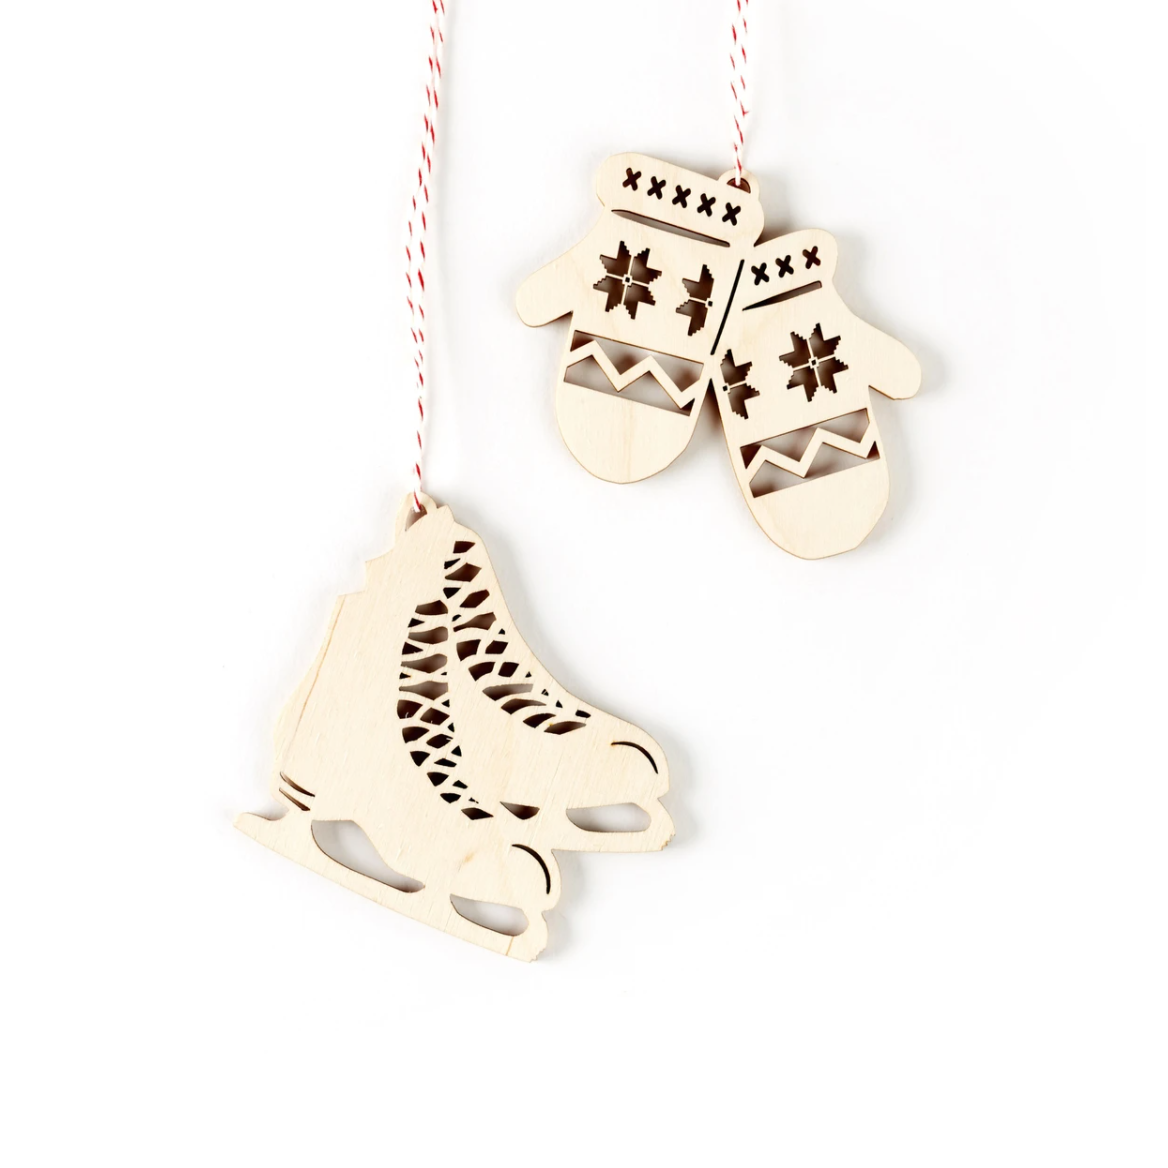 Skates and Mitts Ornament Set